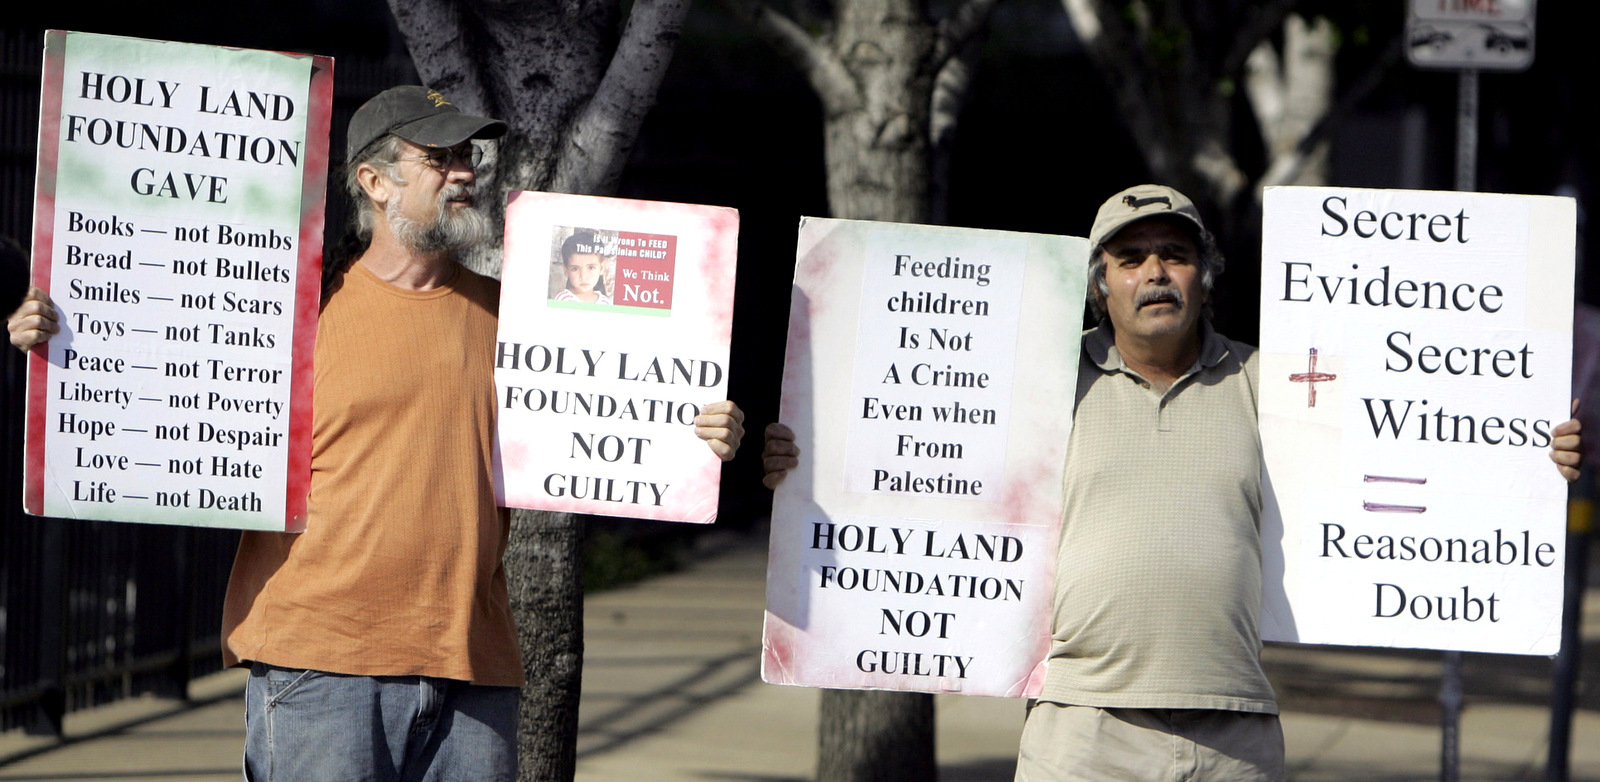 John Wolf, left, and Hadi Jawad hold signs supporting the Holy Land Foundation defendants while standing outside the federal courthouse in Dallas, Texas, Thursday, Oct. 18, 2007. (AP/LM Otero)